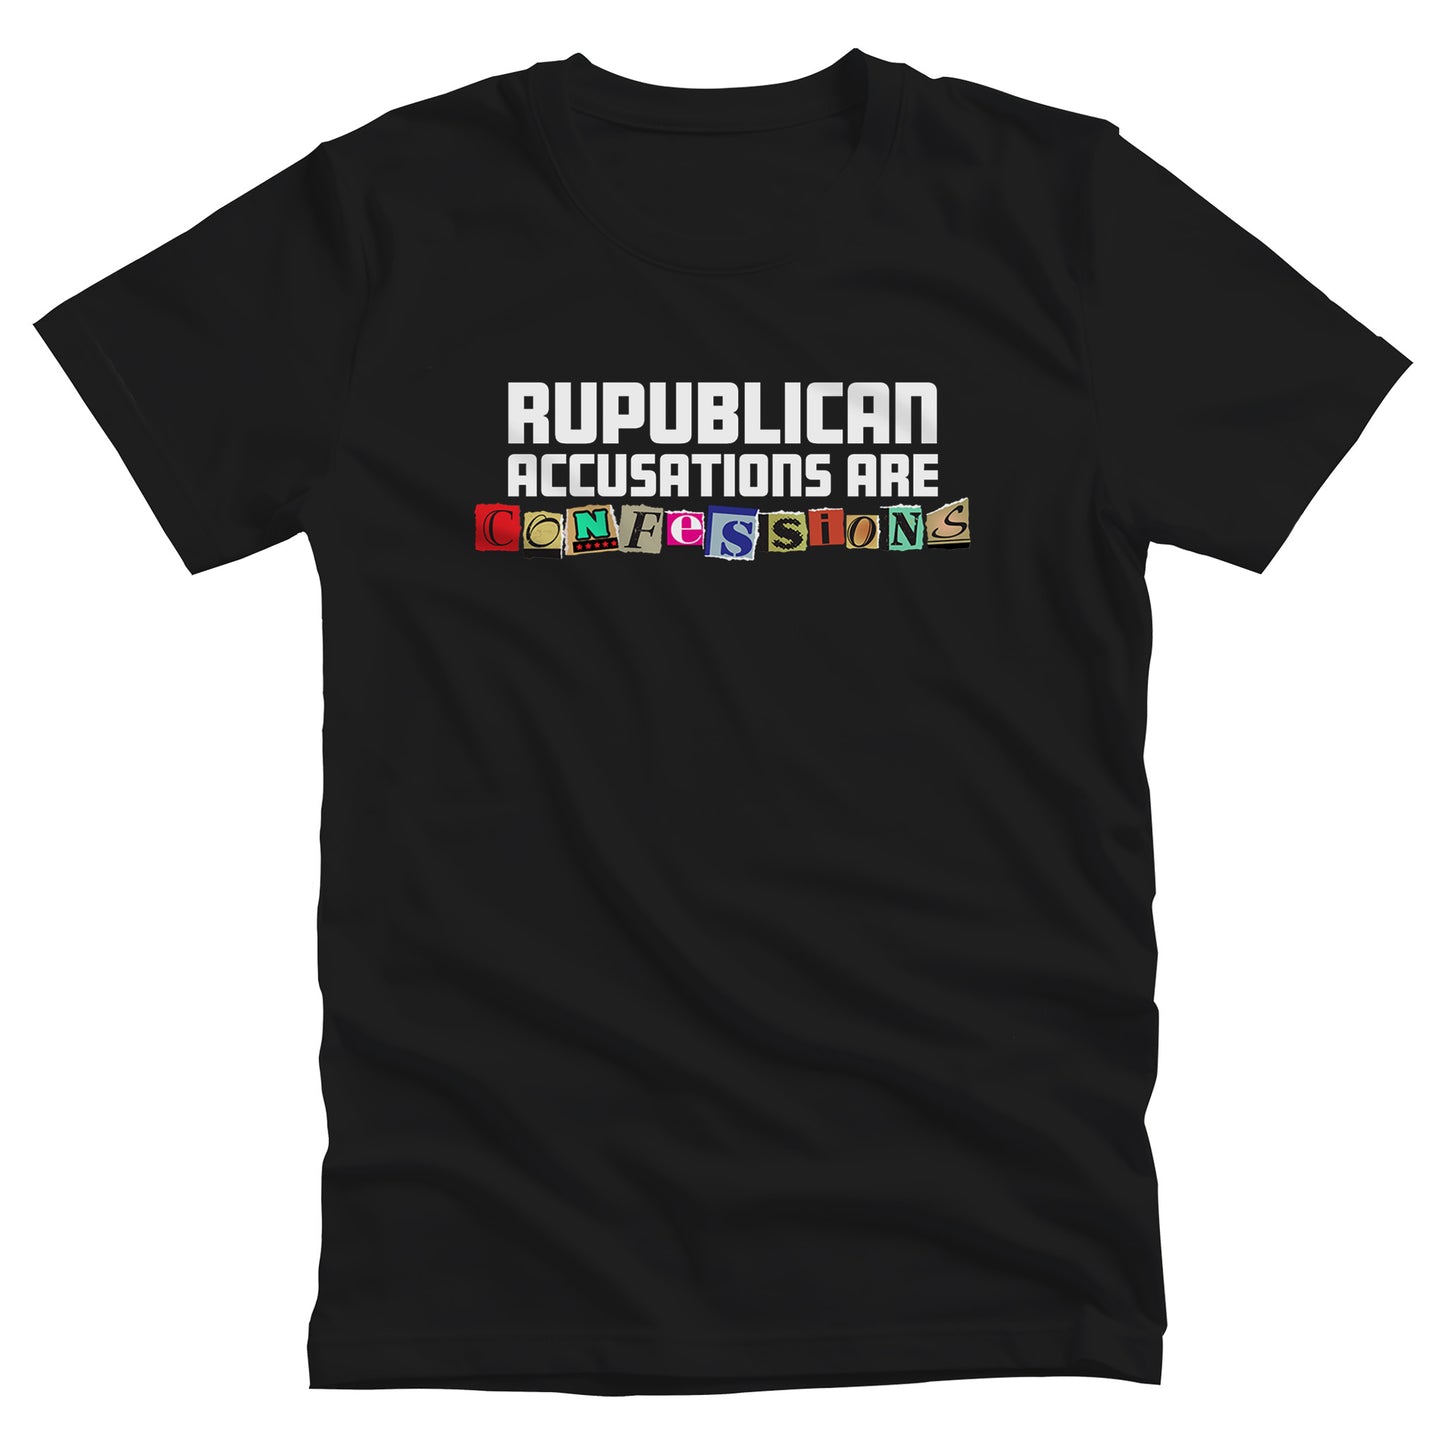 Black unisex t-shirt that says, “REPUBLICAN ACCUSATIONS ARE CONFESSIONS” in a block font. Each letter in “CONFESSIONS” looks like they were cut out of various magazines. 